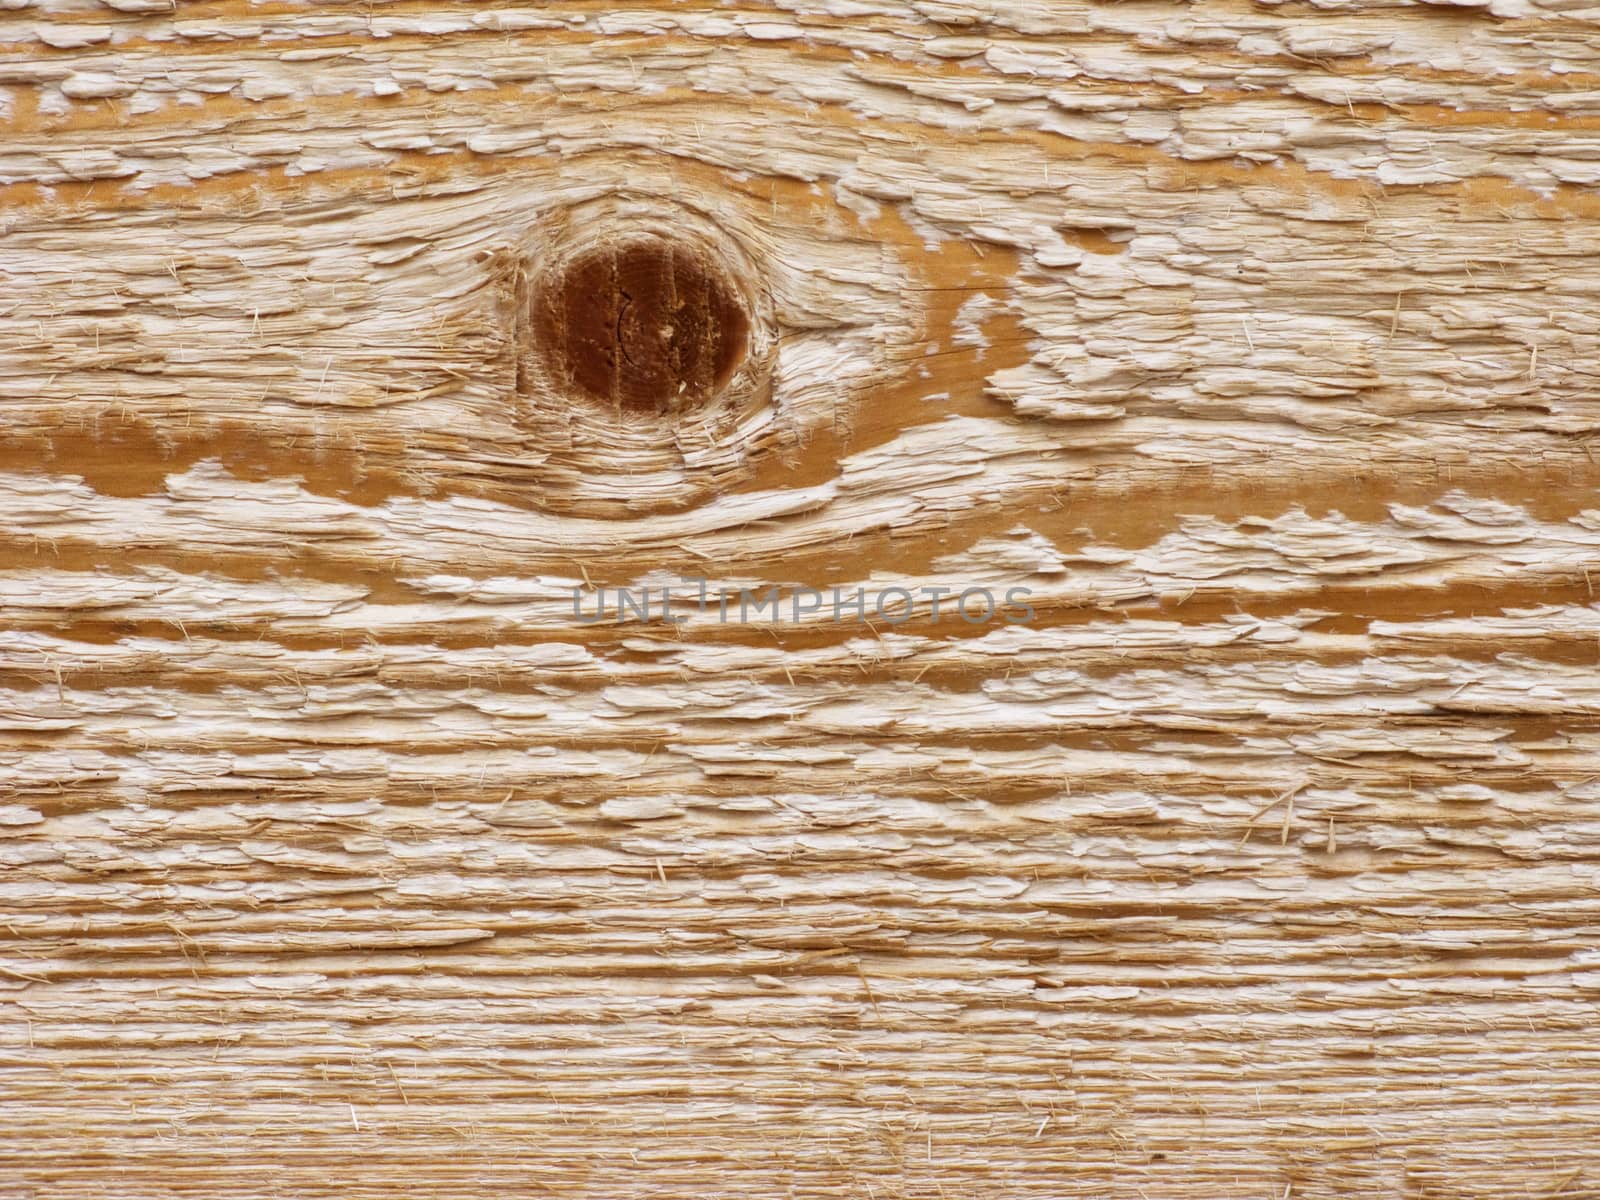 Close up of uncolored plank surface with knot